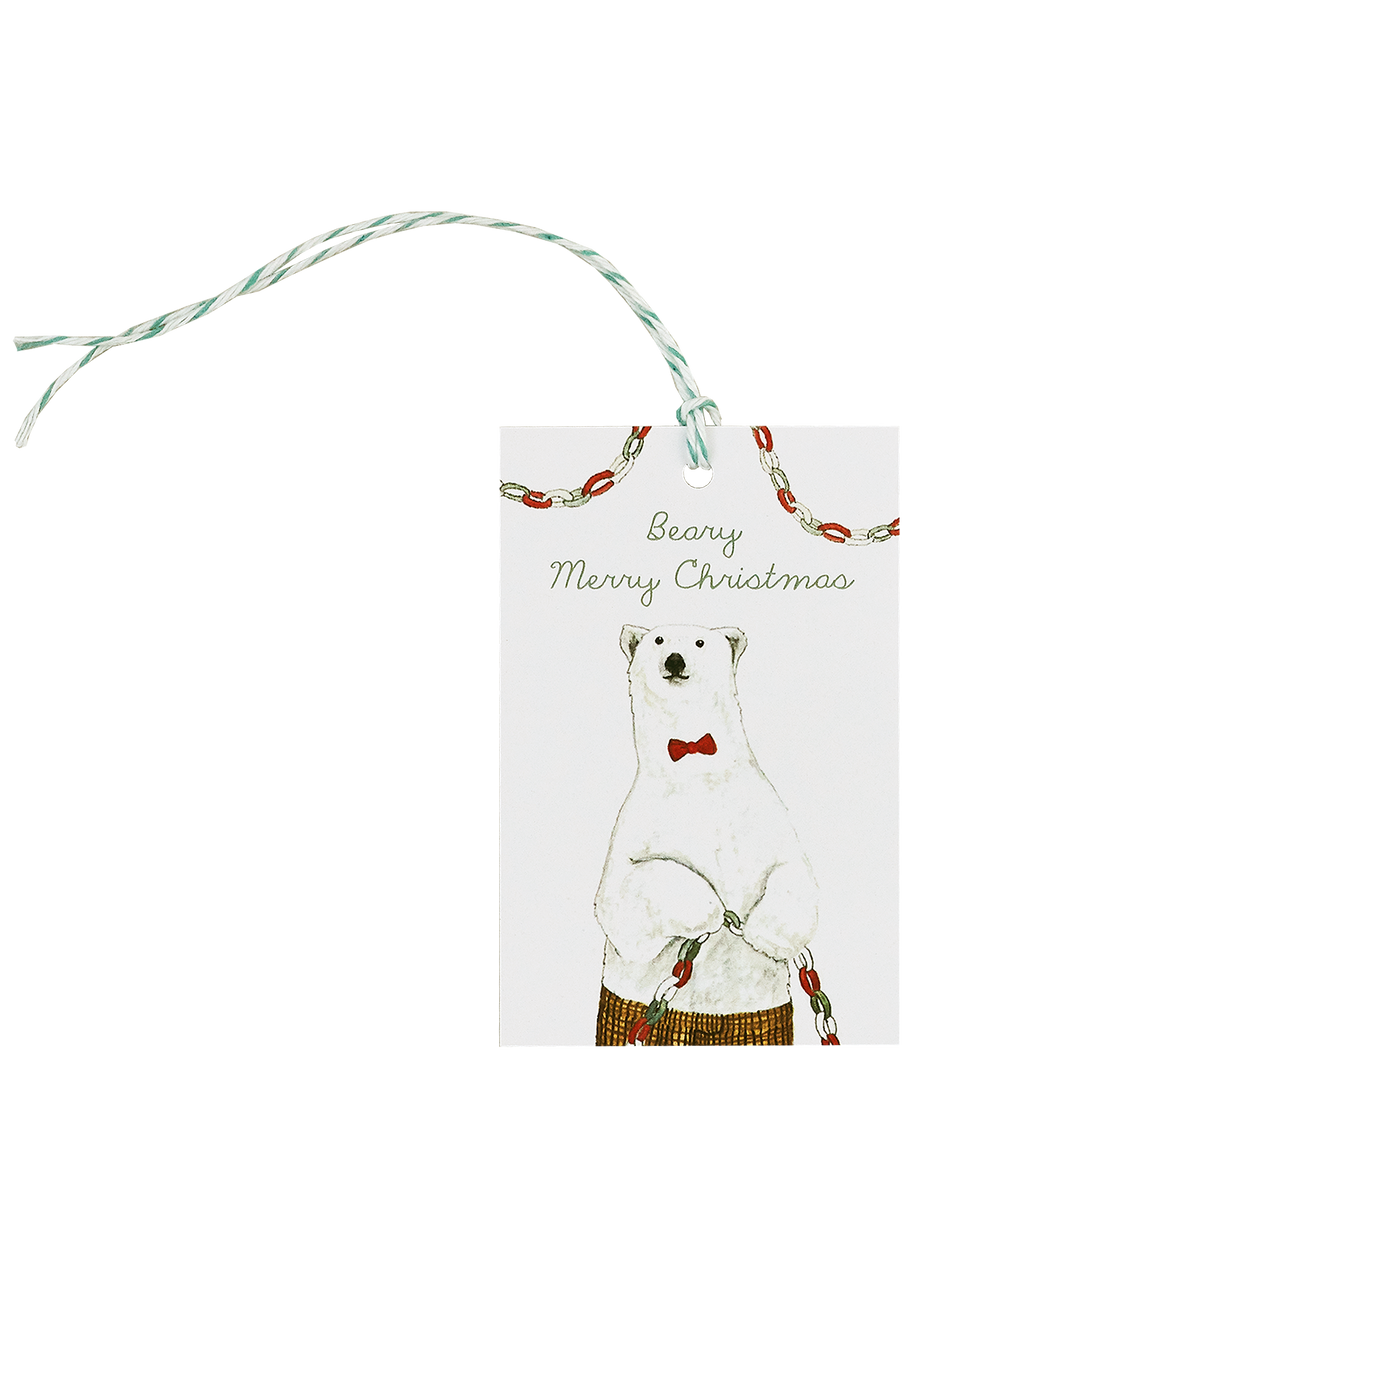 Beary Merry Christmas Tag with striped string